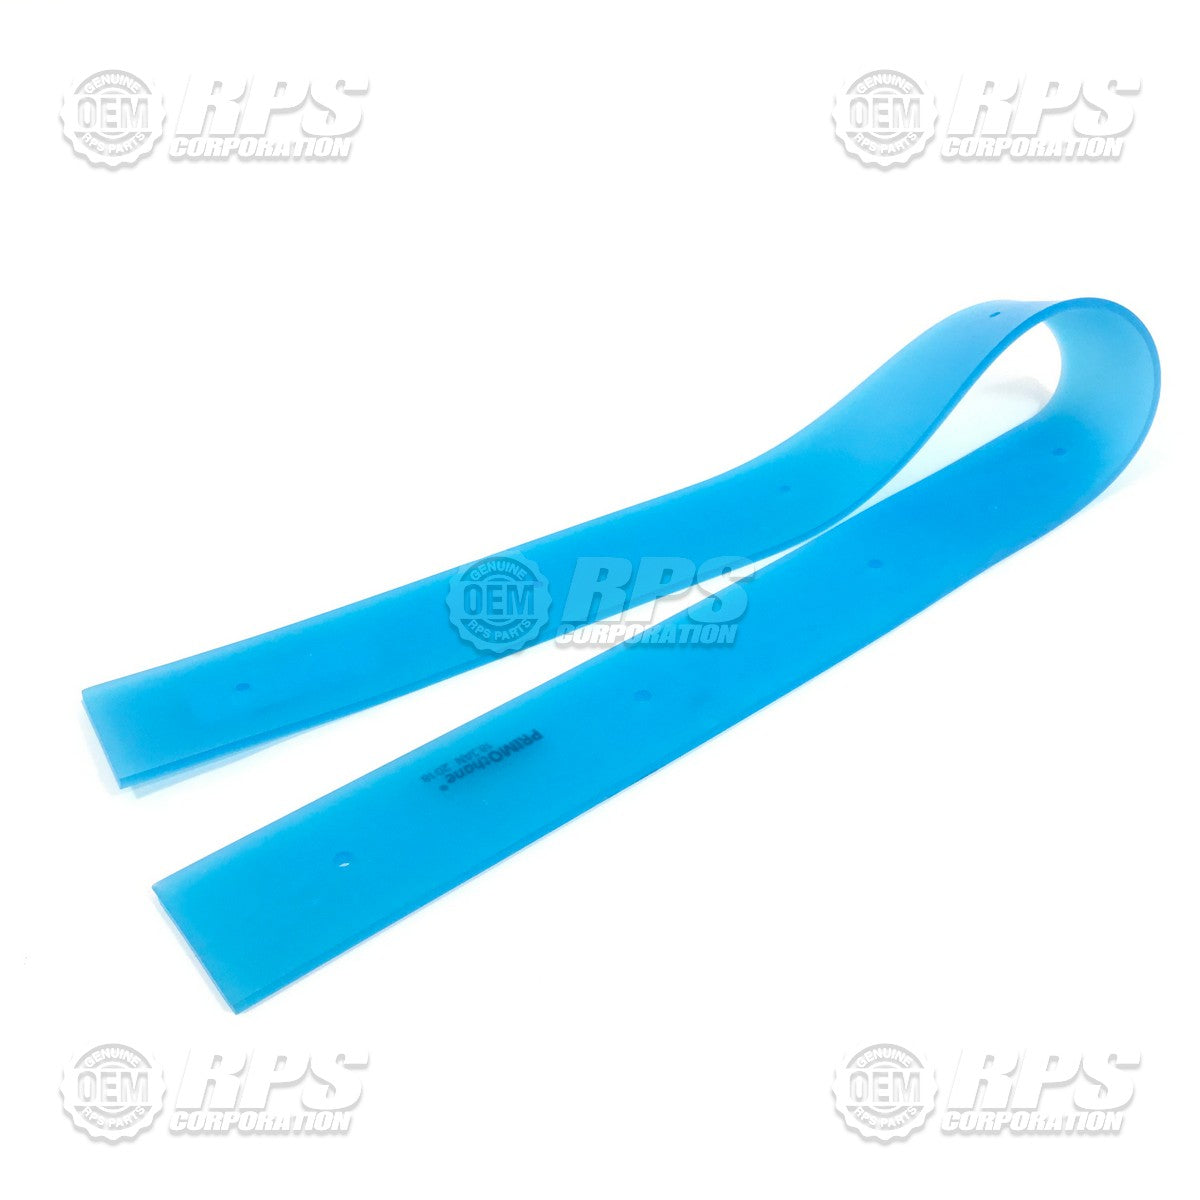 FactoryCat/Tomcat 25-754U, Squeegee Blade,Rear,Urethane Clear,Fits 35"